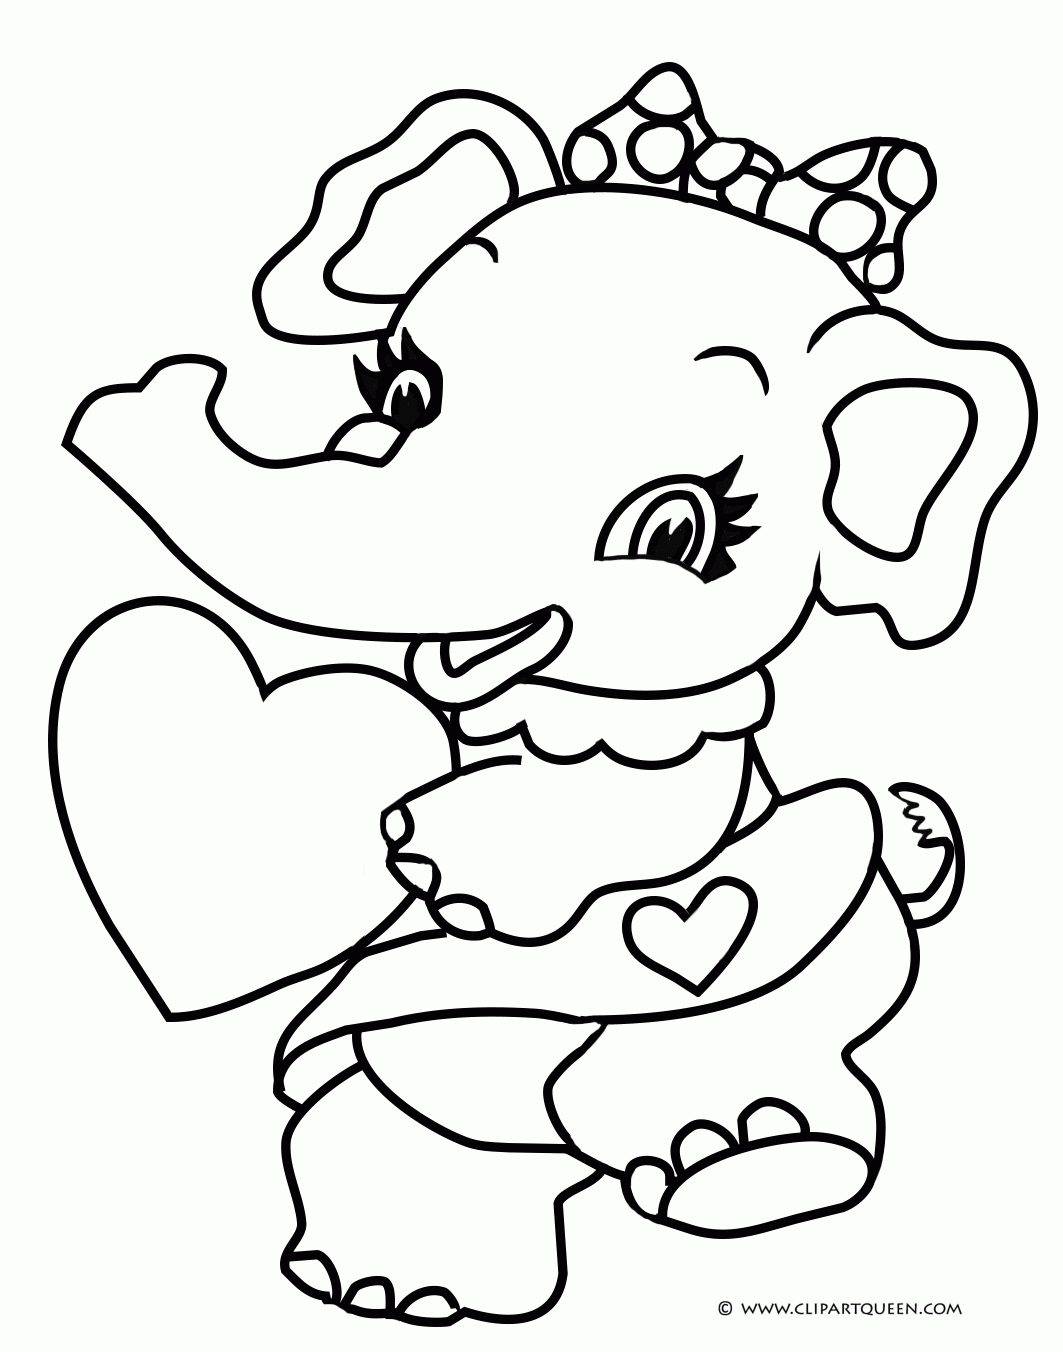 Fun And Cute Coloring Pages - Coloring Home